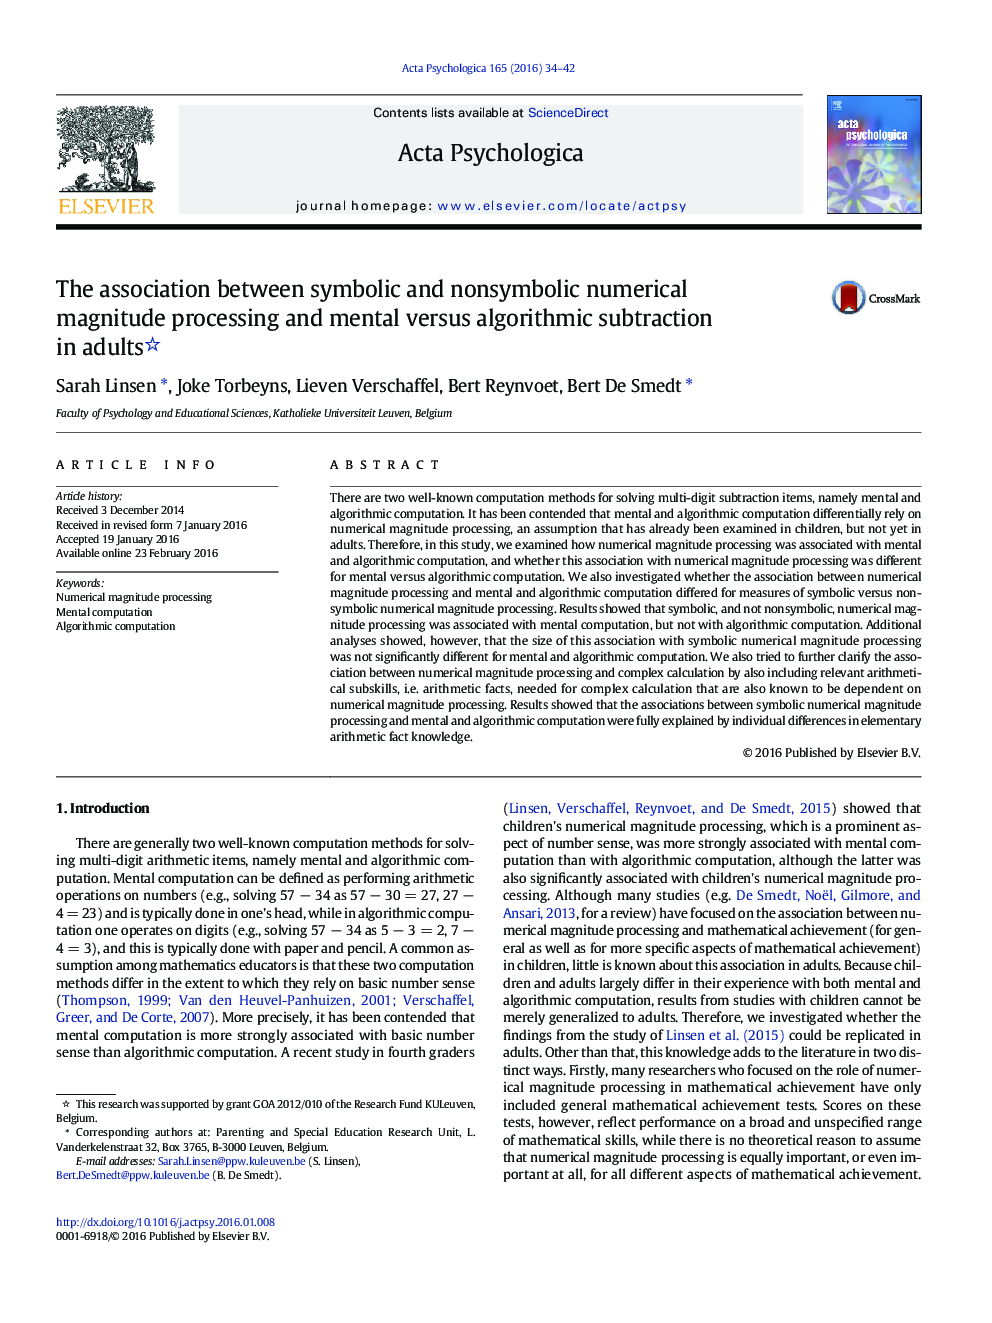 The association between symbolic and nonsymbolic numerical magnitude processing and mental versus algorithmic subtraction in adults 